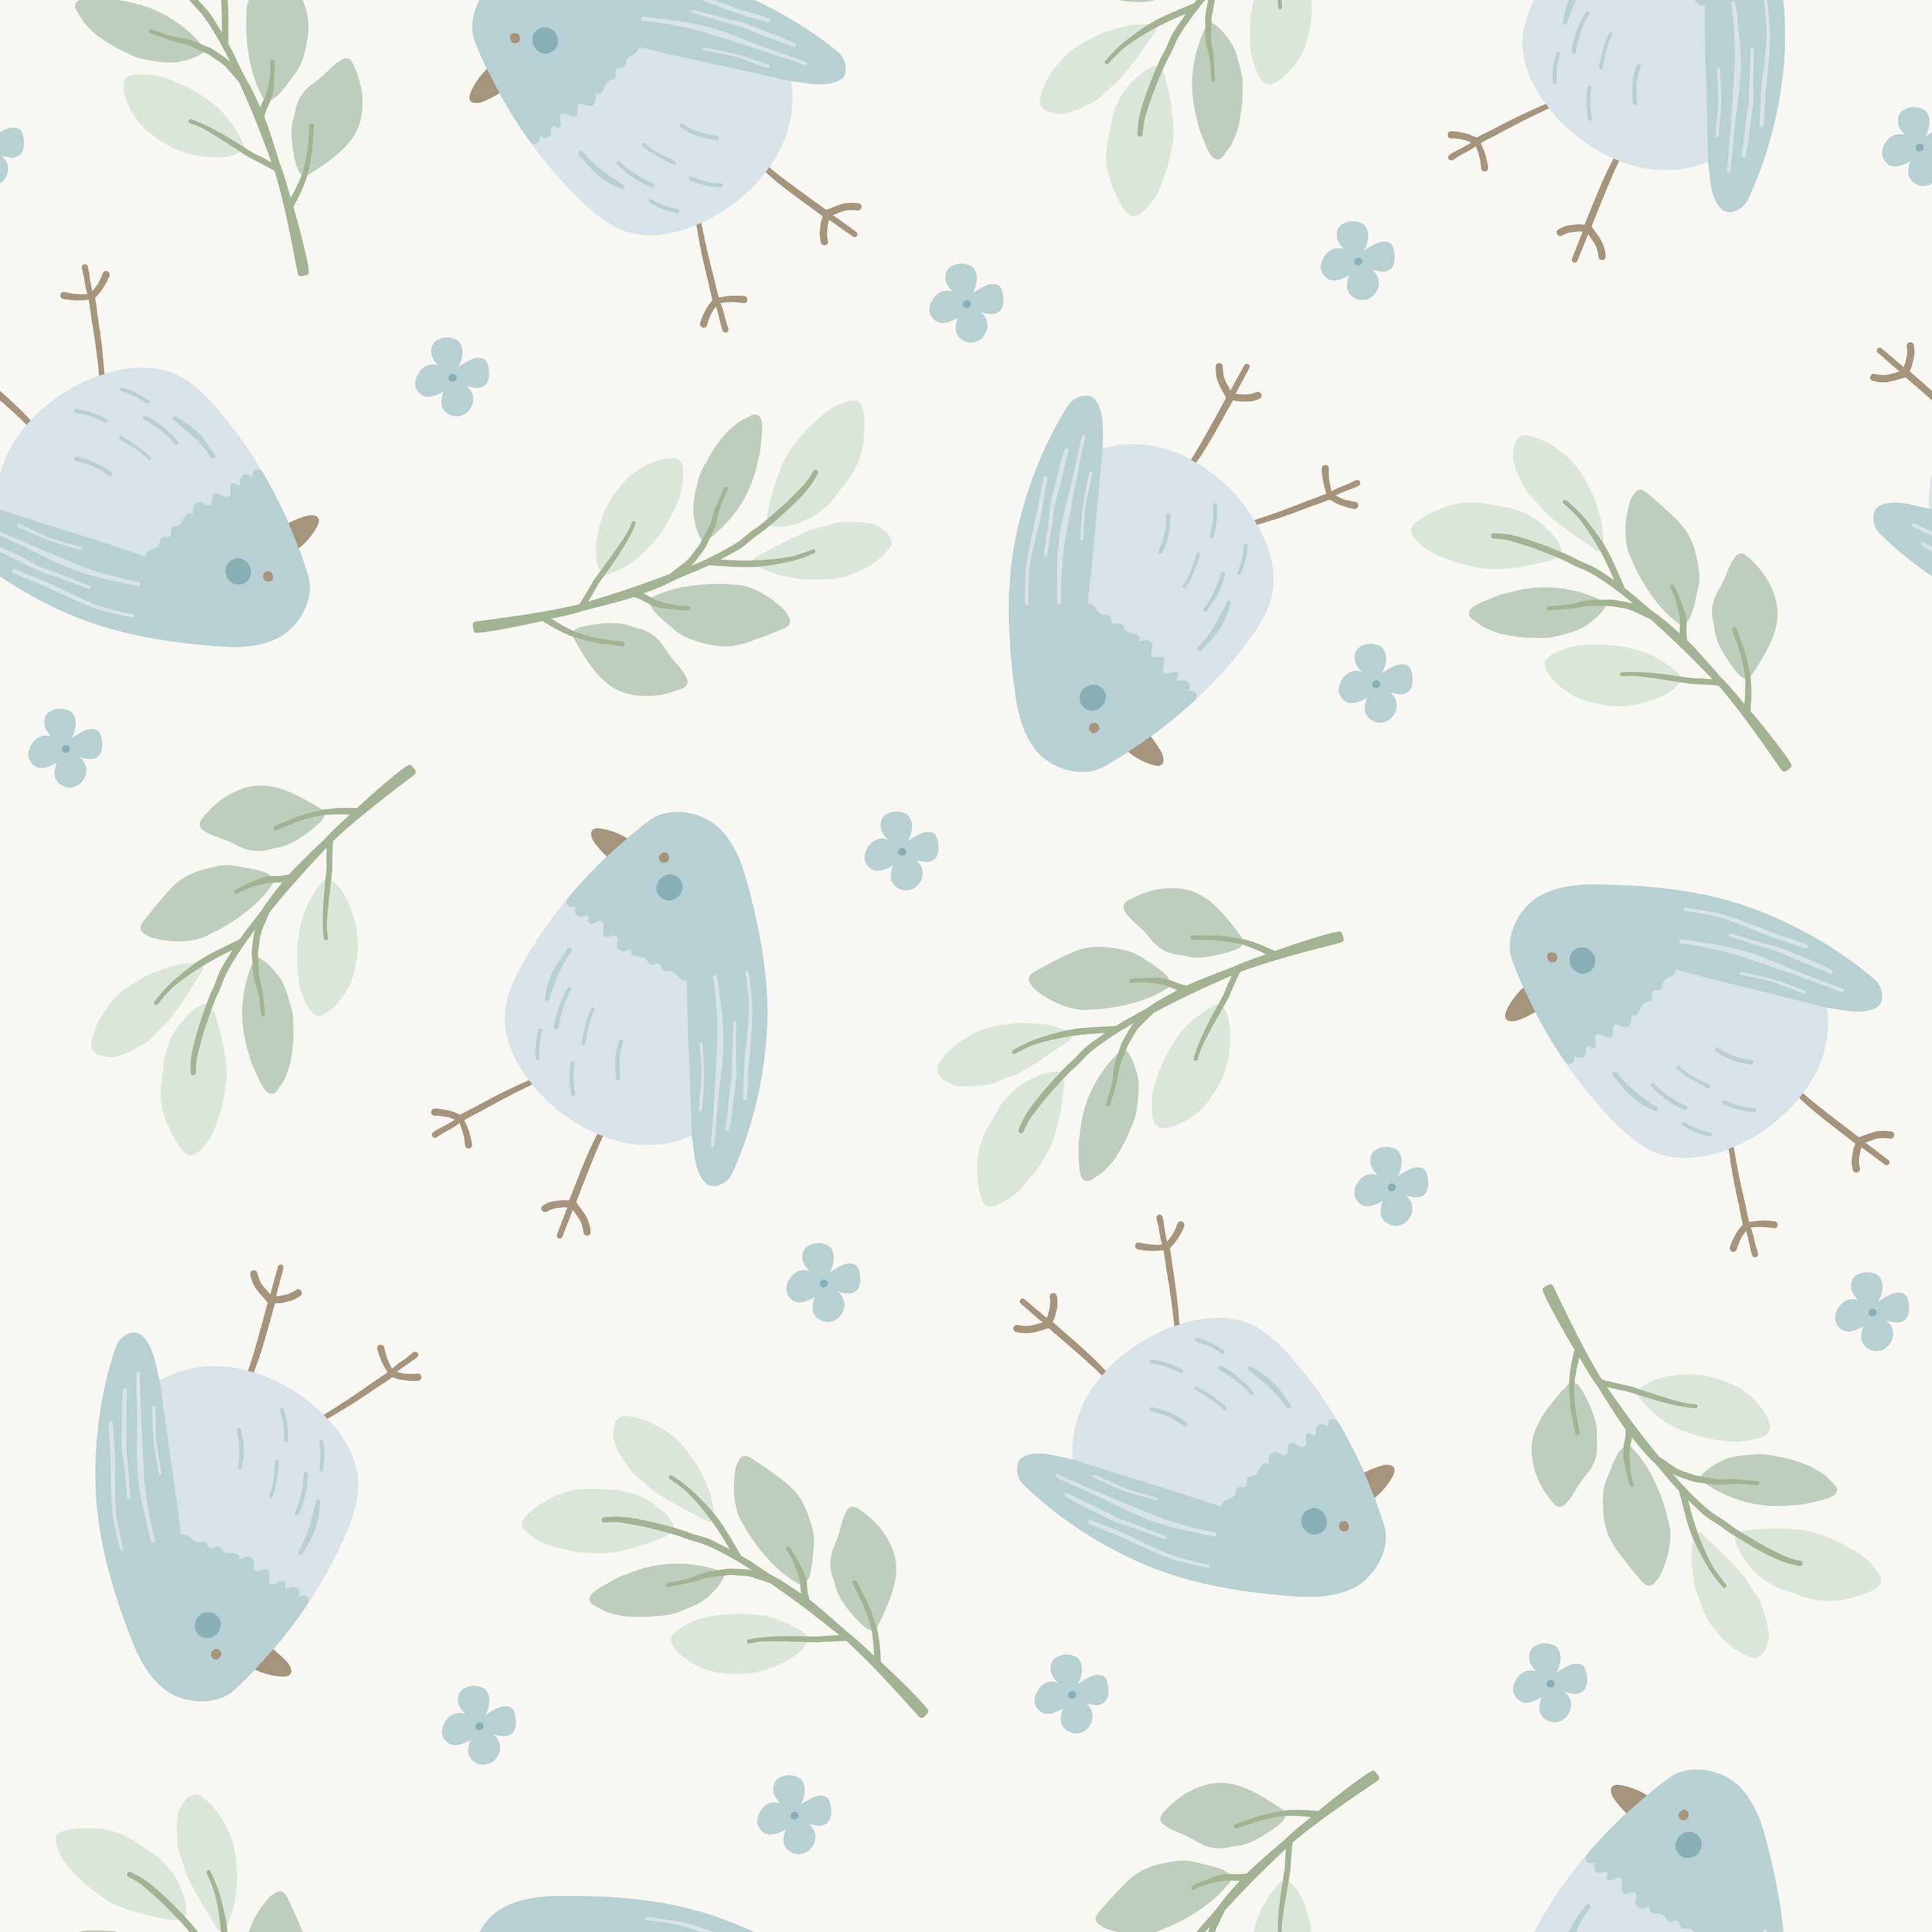 A close-up of the Baby Blue Bird Wallpaper, displaying a charming pattern of stylized blue birds and green leaves on a light background, perfect for a peaceful and cheerful nursery setting.